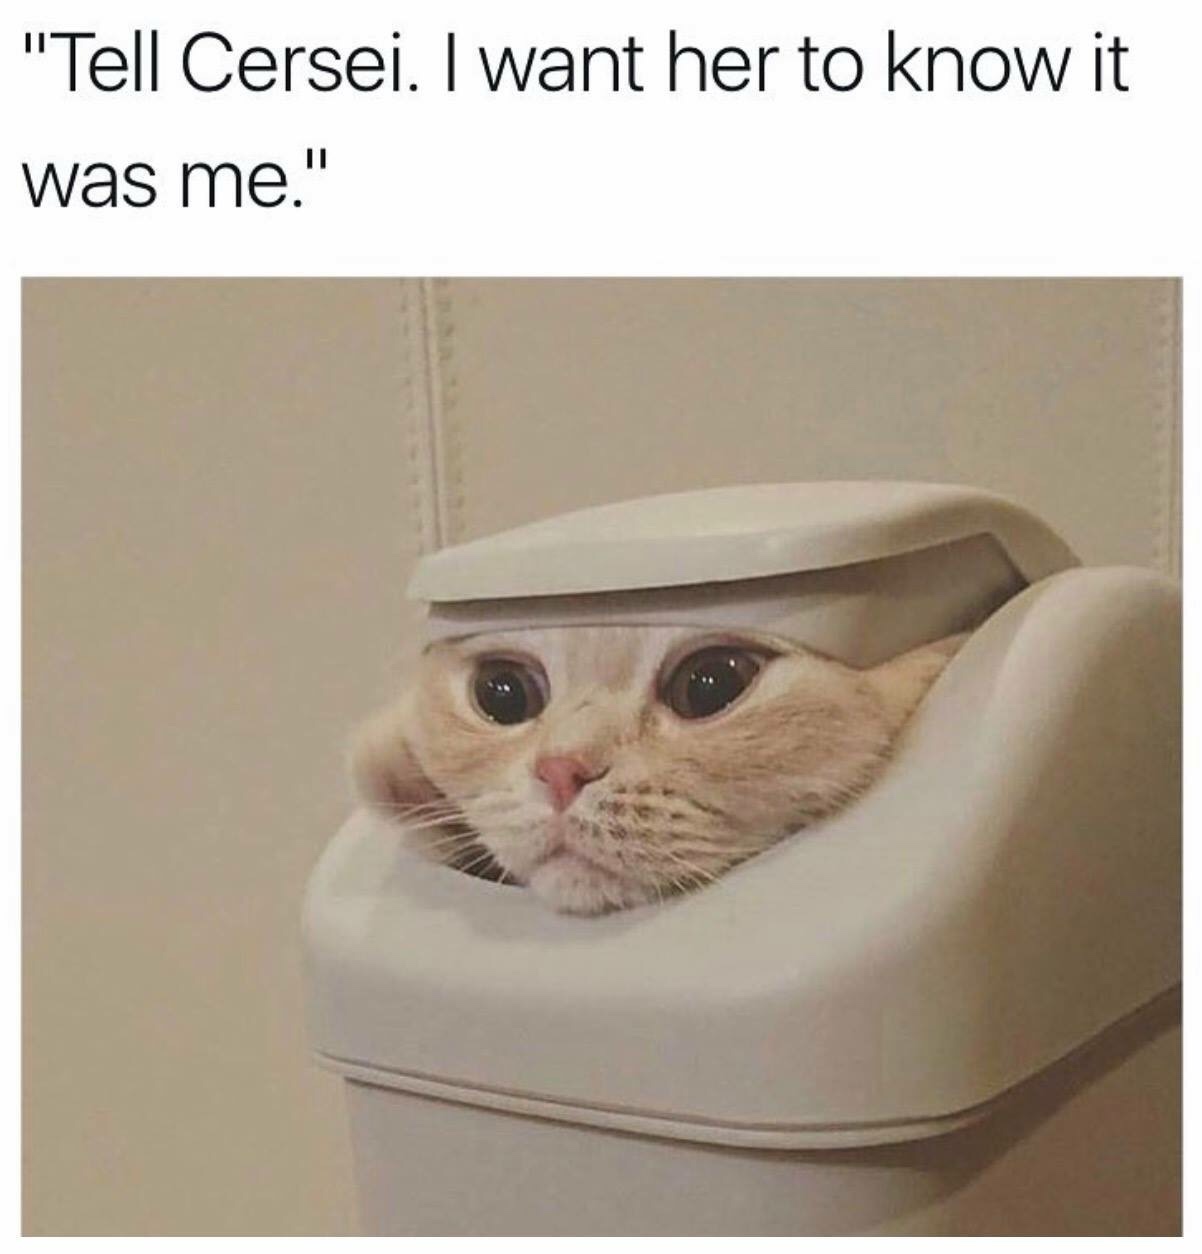 memes - tell cersei i want her to know - "Tell Cersei. I want her to know it was me."